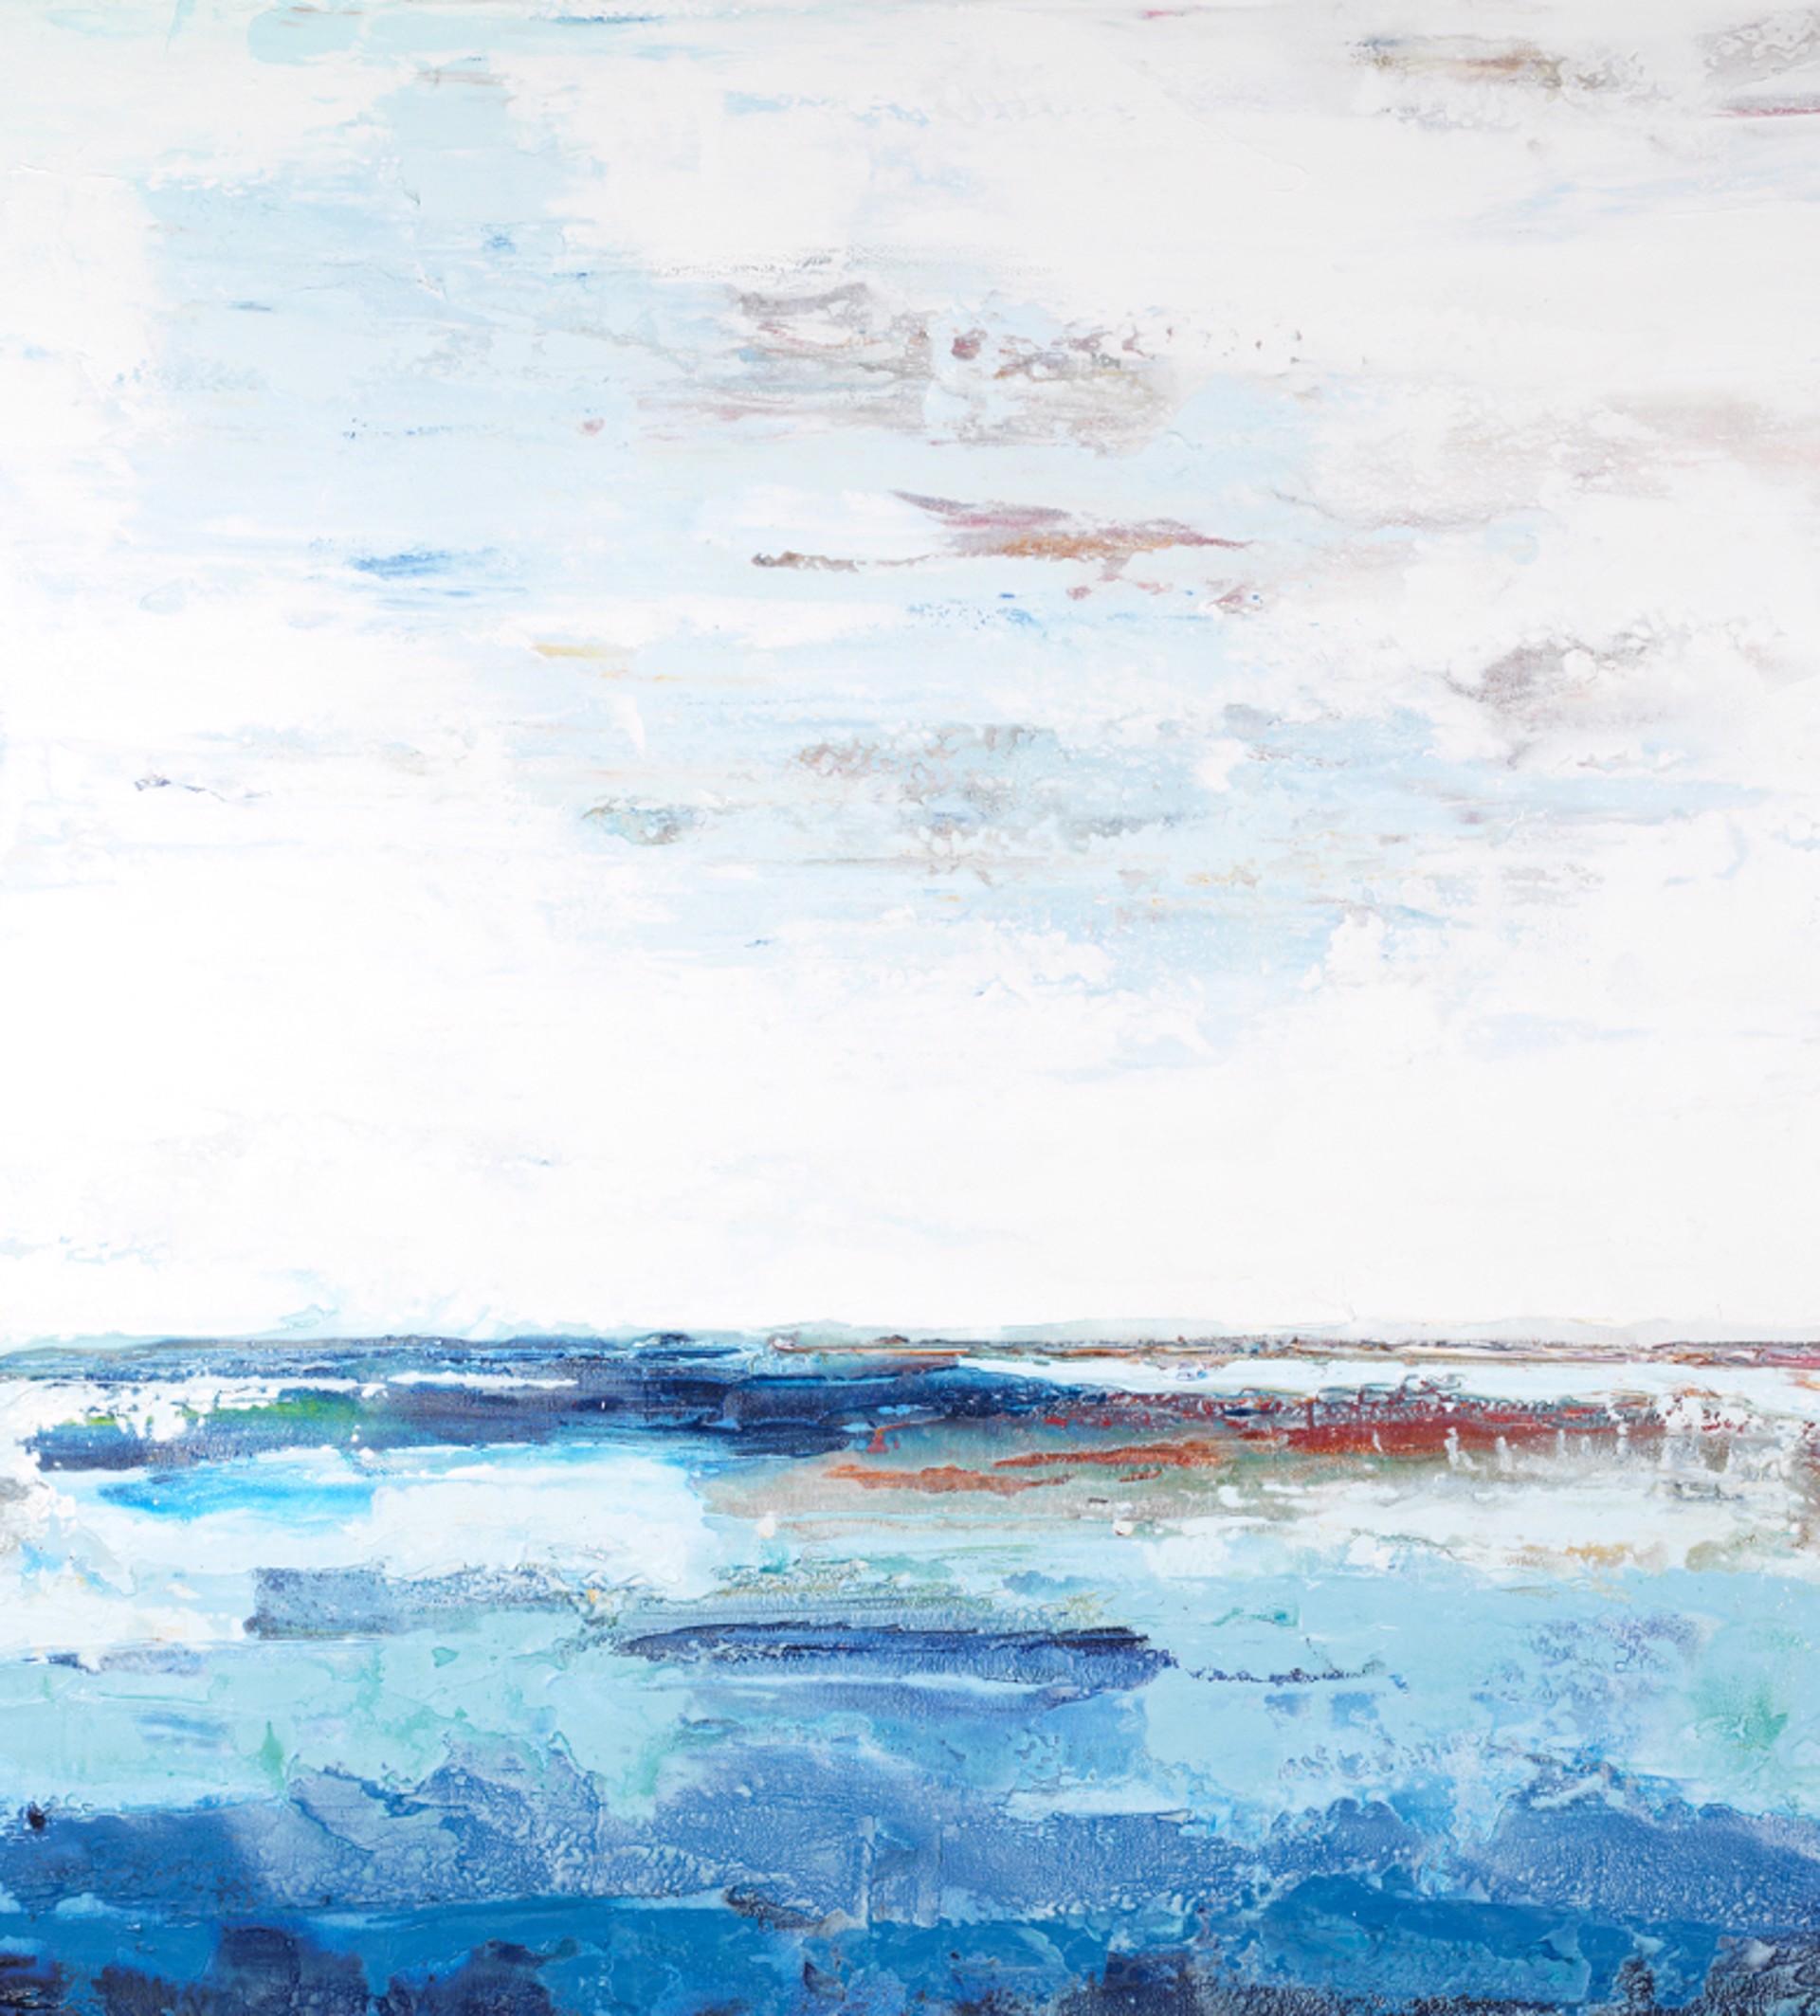 Marino #67 is a beautiful 64"H x 60"W abstract seascape painting by South Florida artist and painter John Schuyler, featuring a dividing line where sky meets sea. 